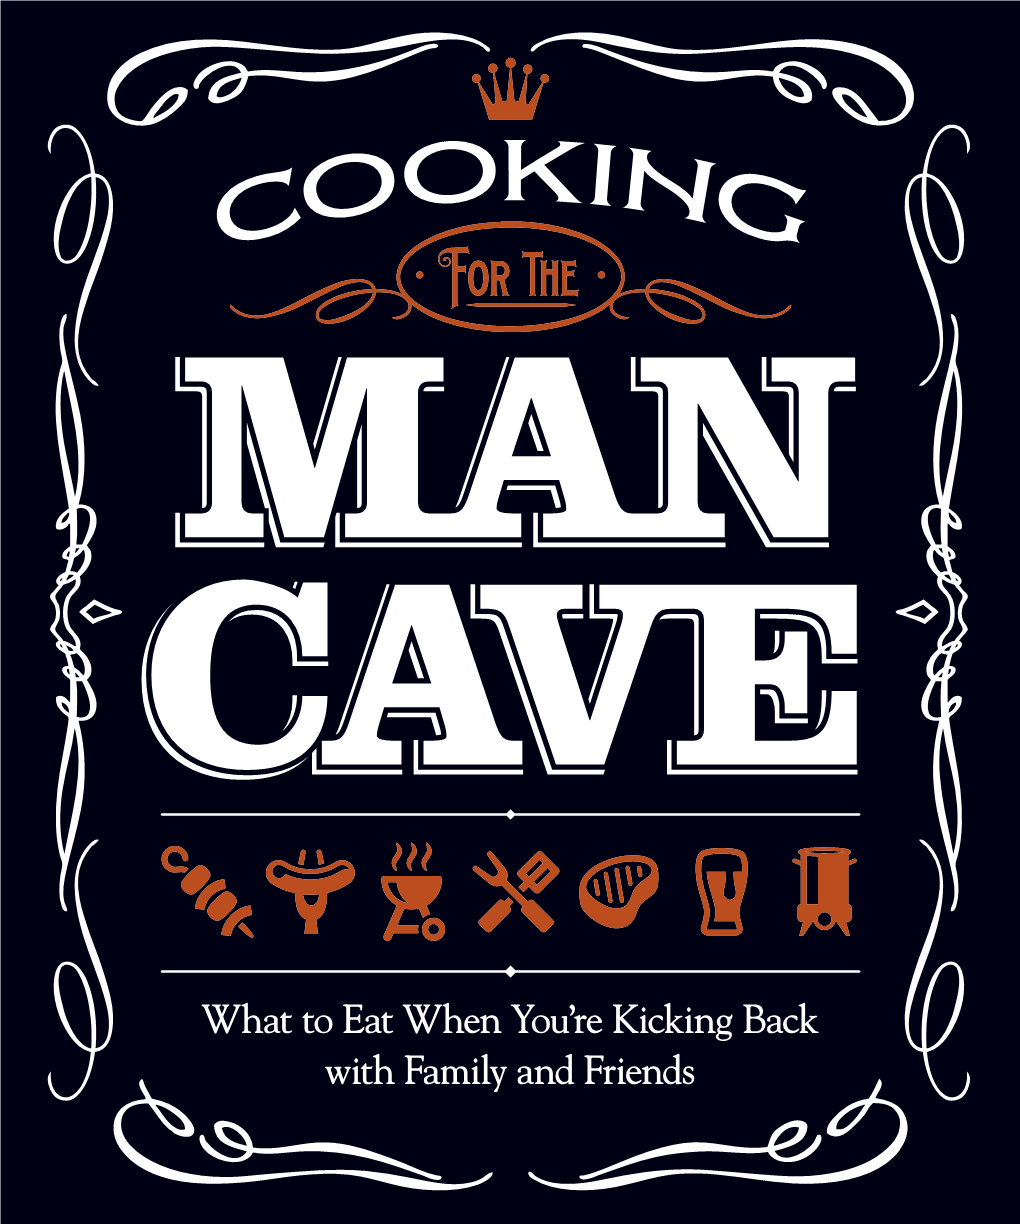 740-7 Cooking for the Man Cave P1.Indd